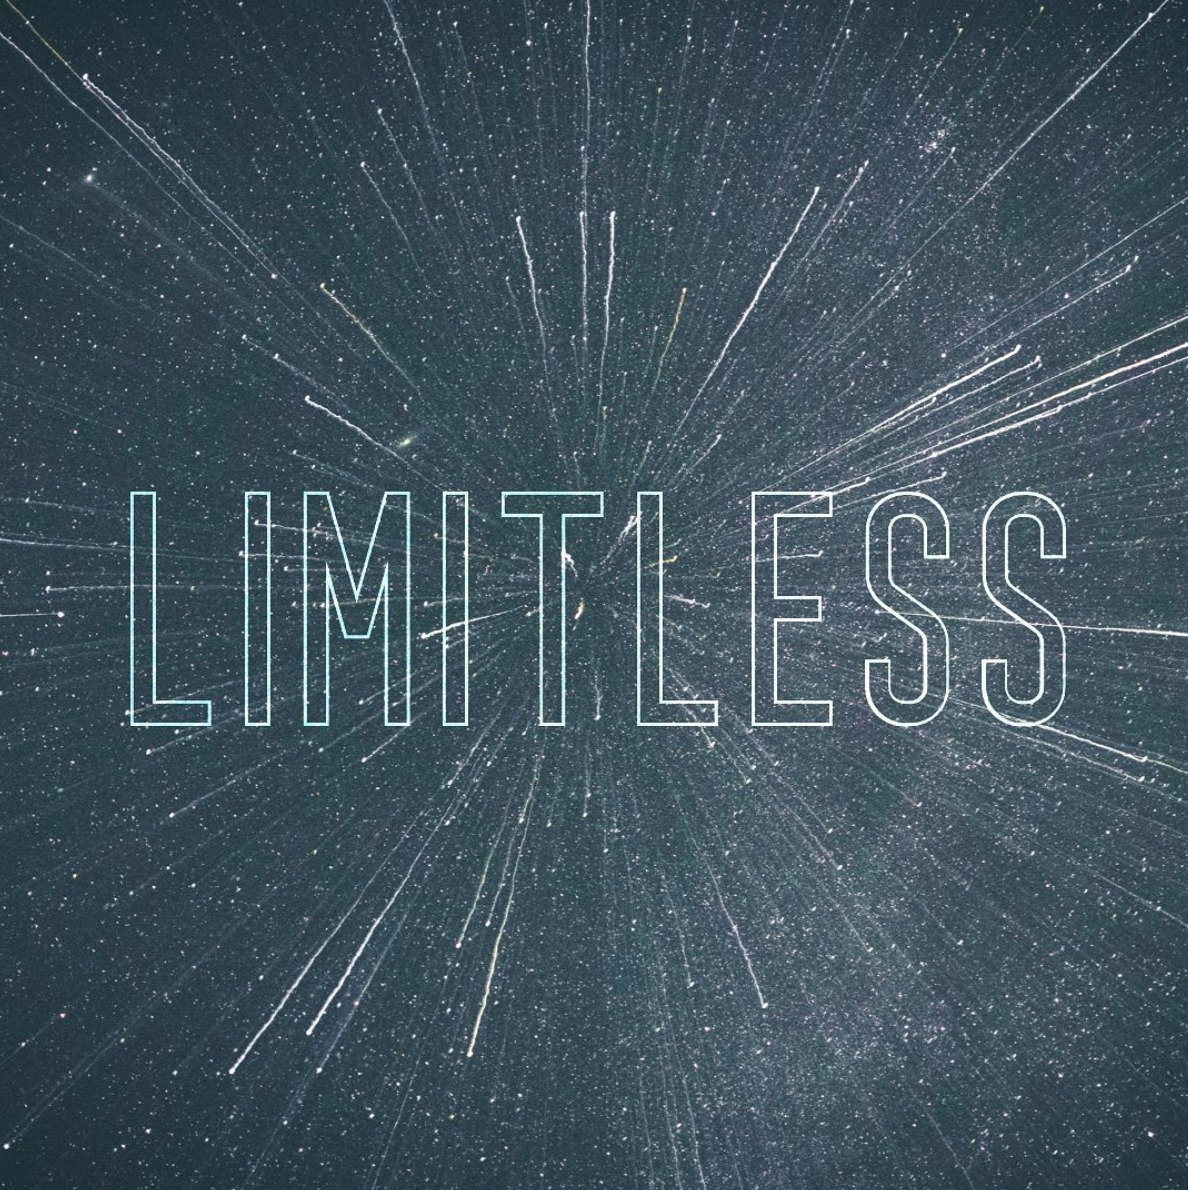 Limitless.png